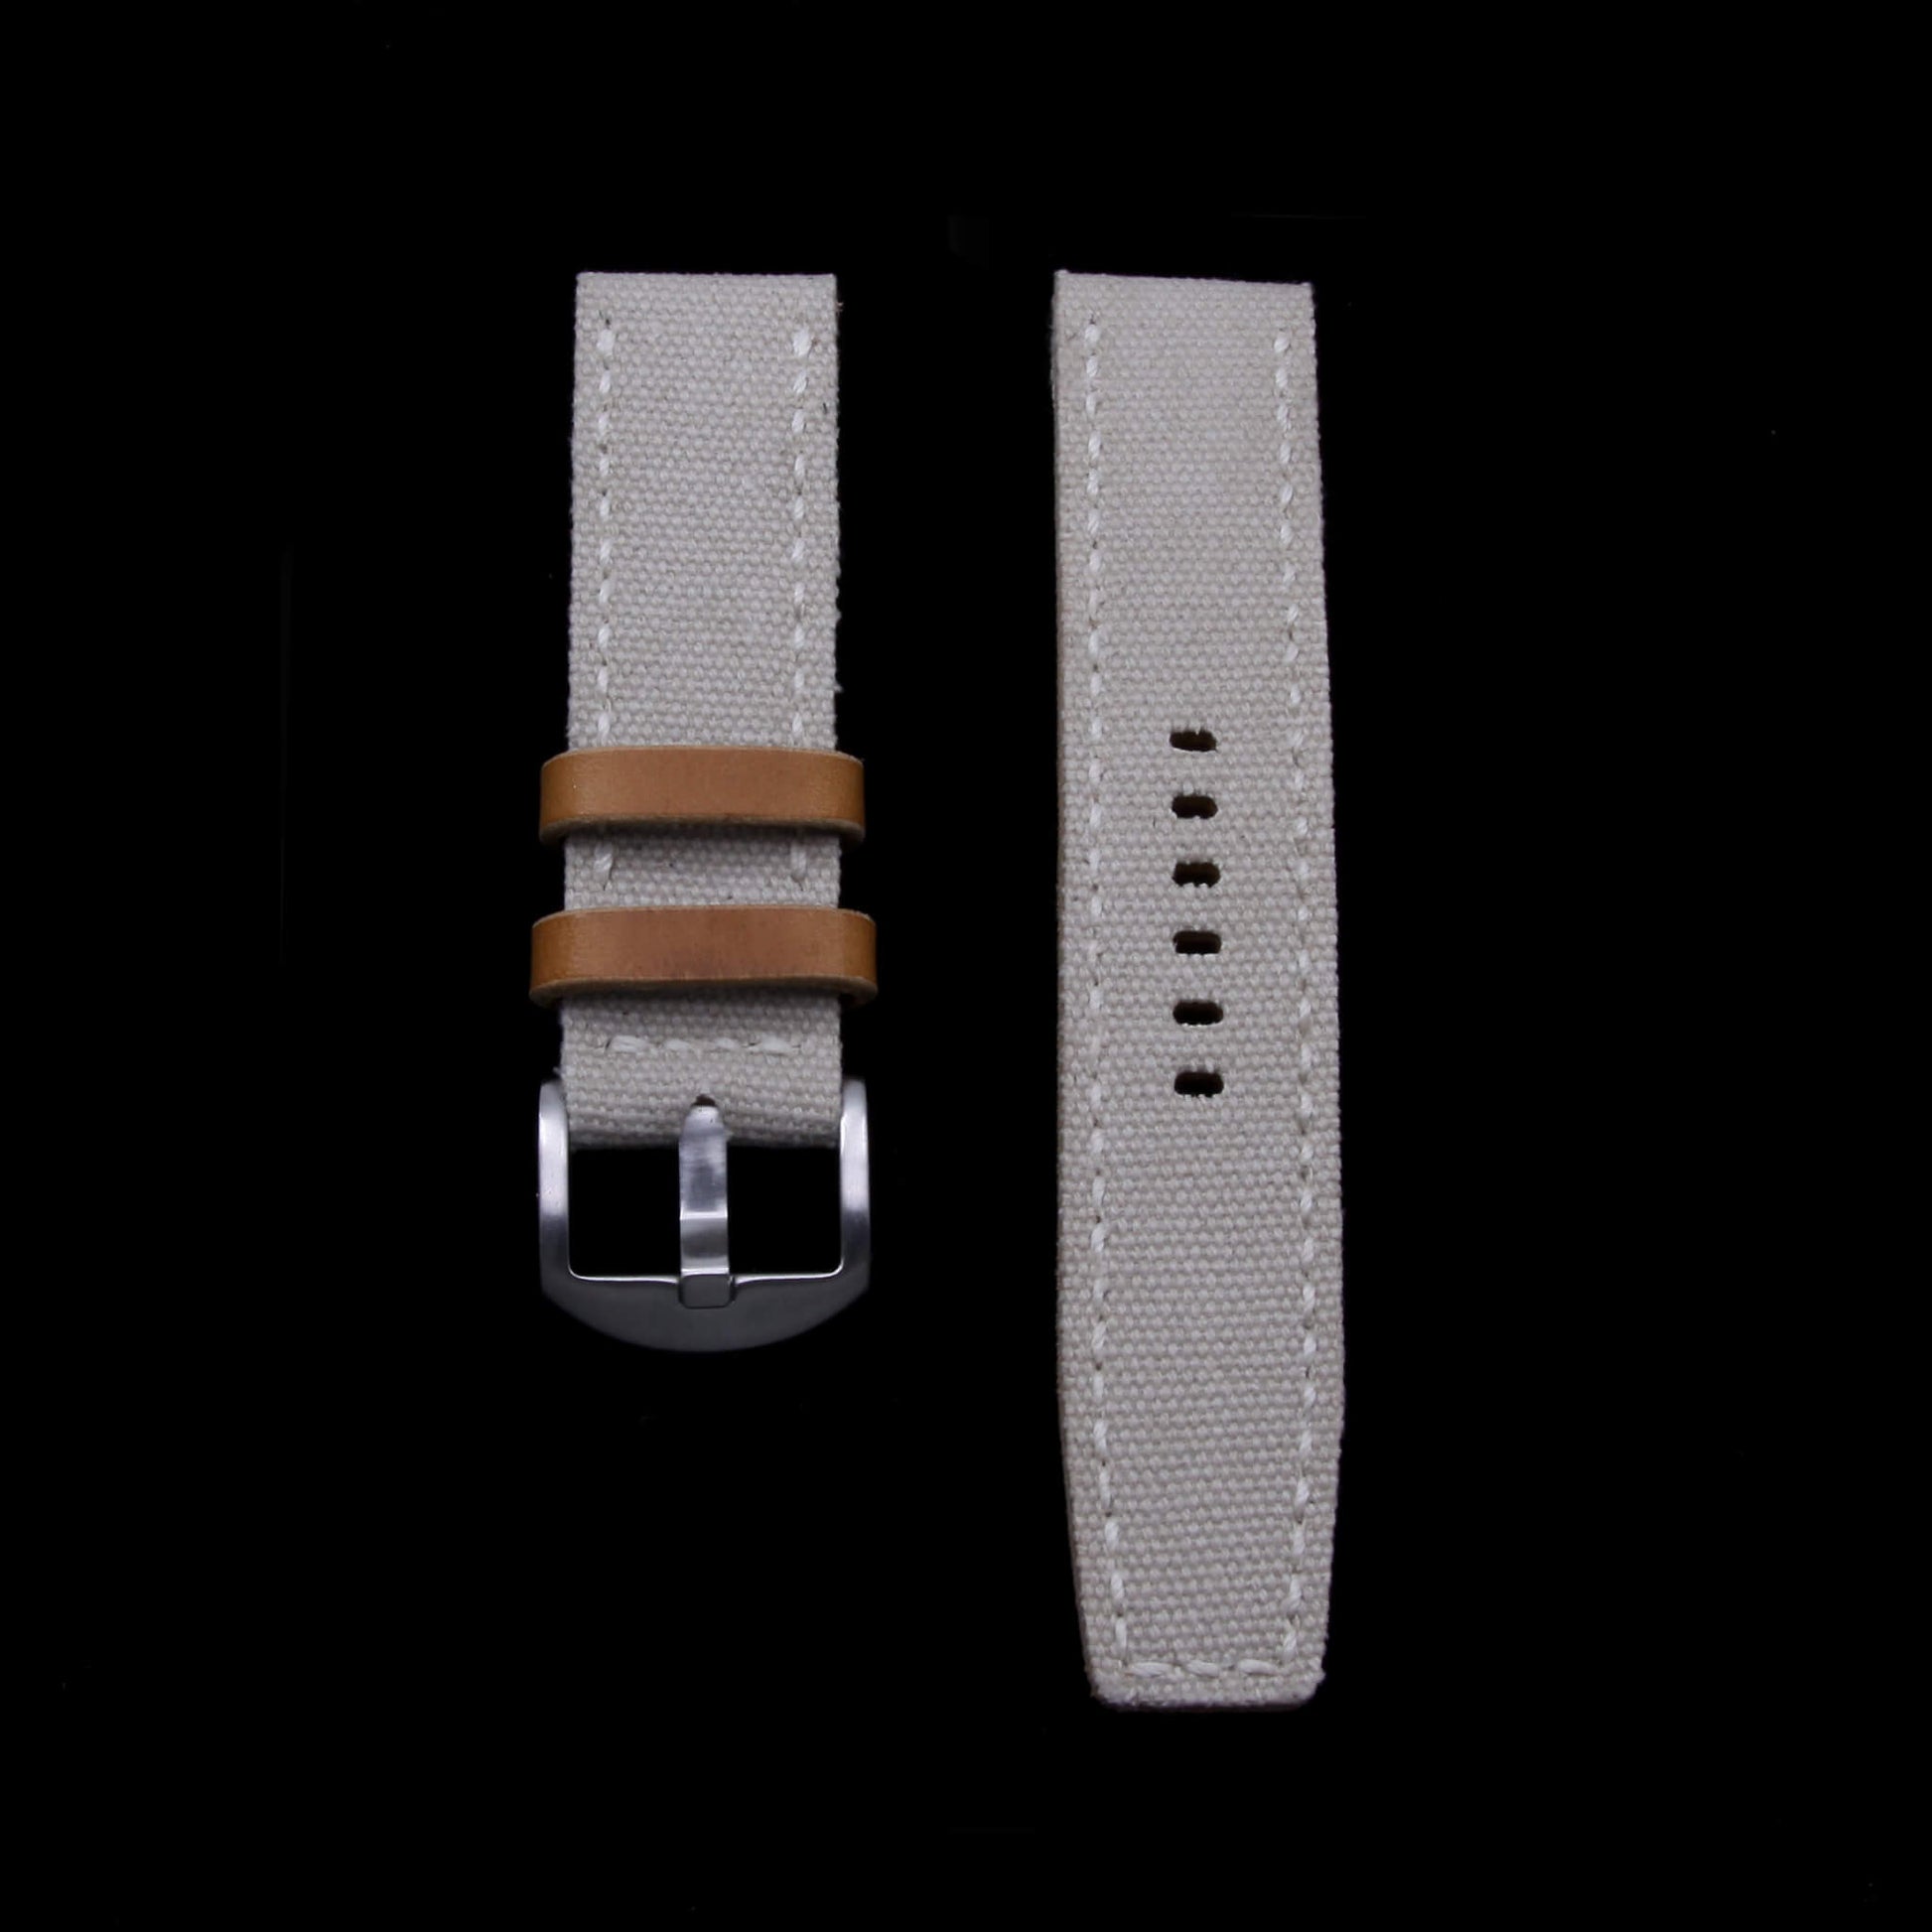 2nd View of 2-Piece Full Stitch Leather Watch Strap, made with Beige Canvas and Italian veg-tanned leather lining, handcrafted by Cozy Handmade